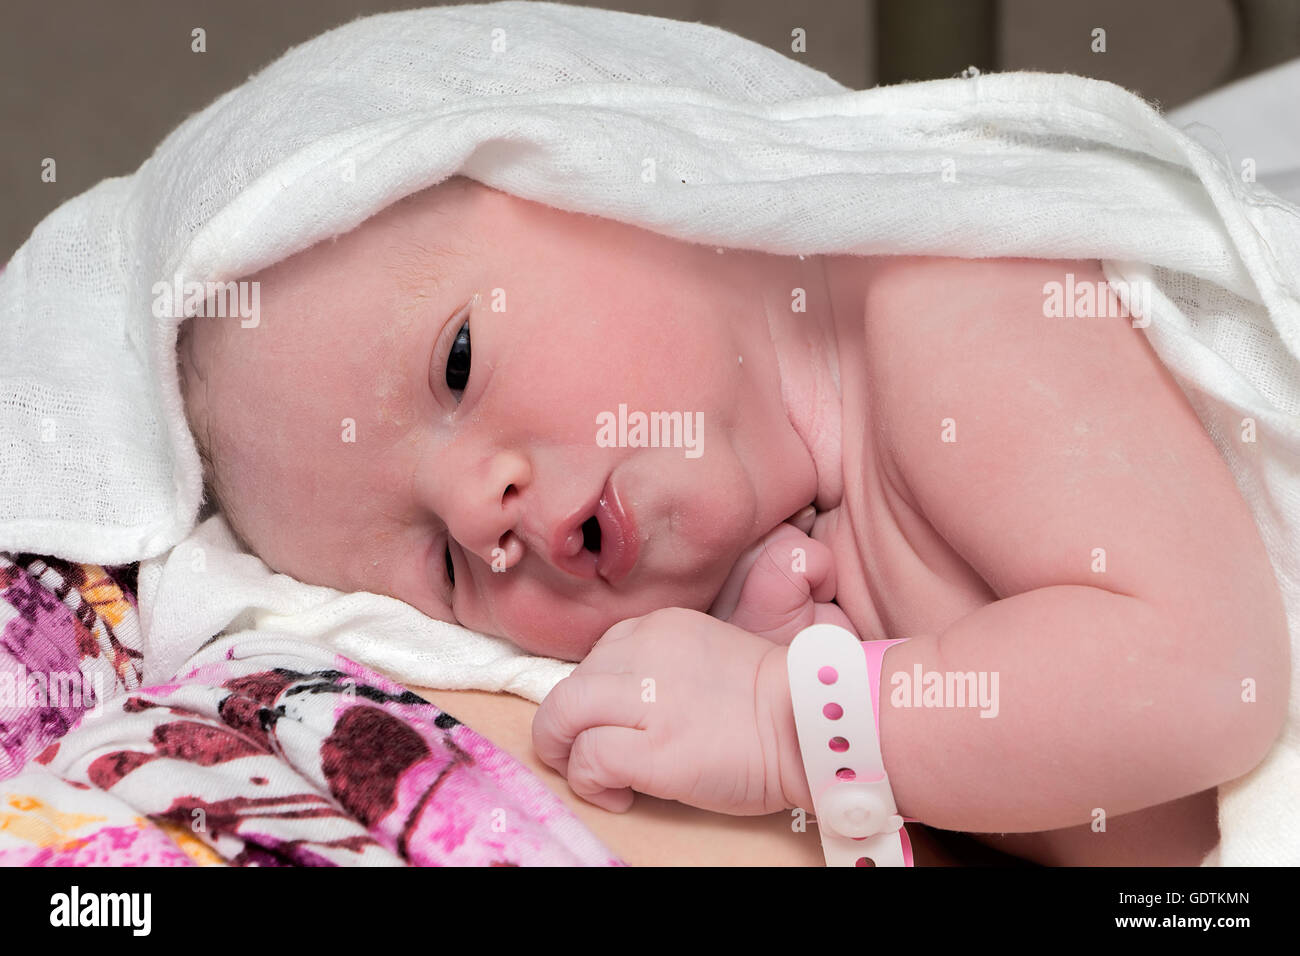 Newborn baby, girl, immediately after delivery resting with her mother Stock Photo